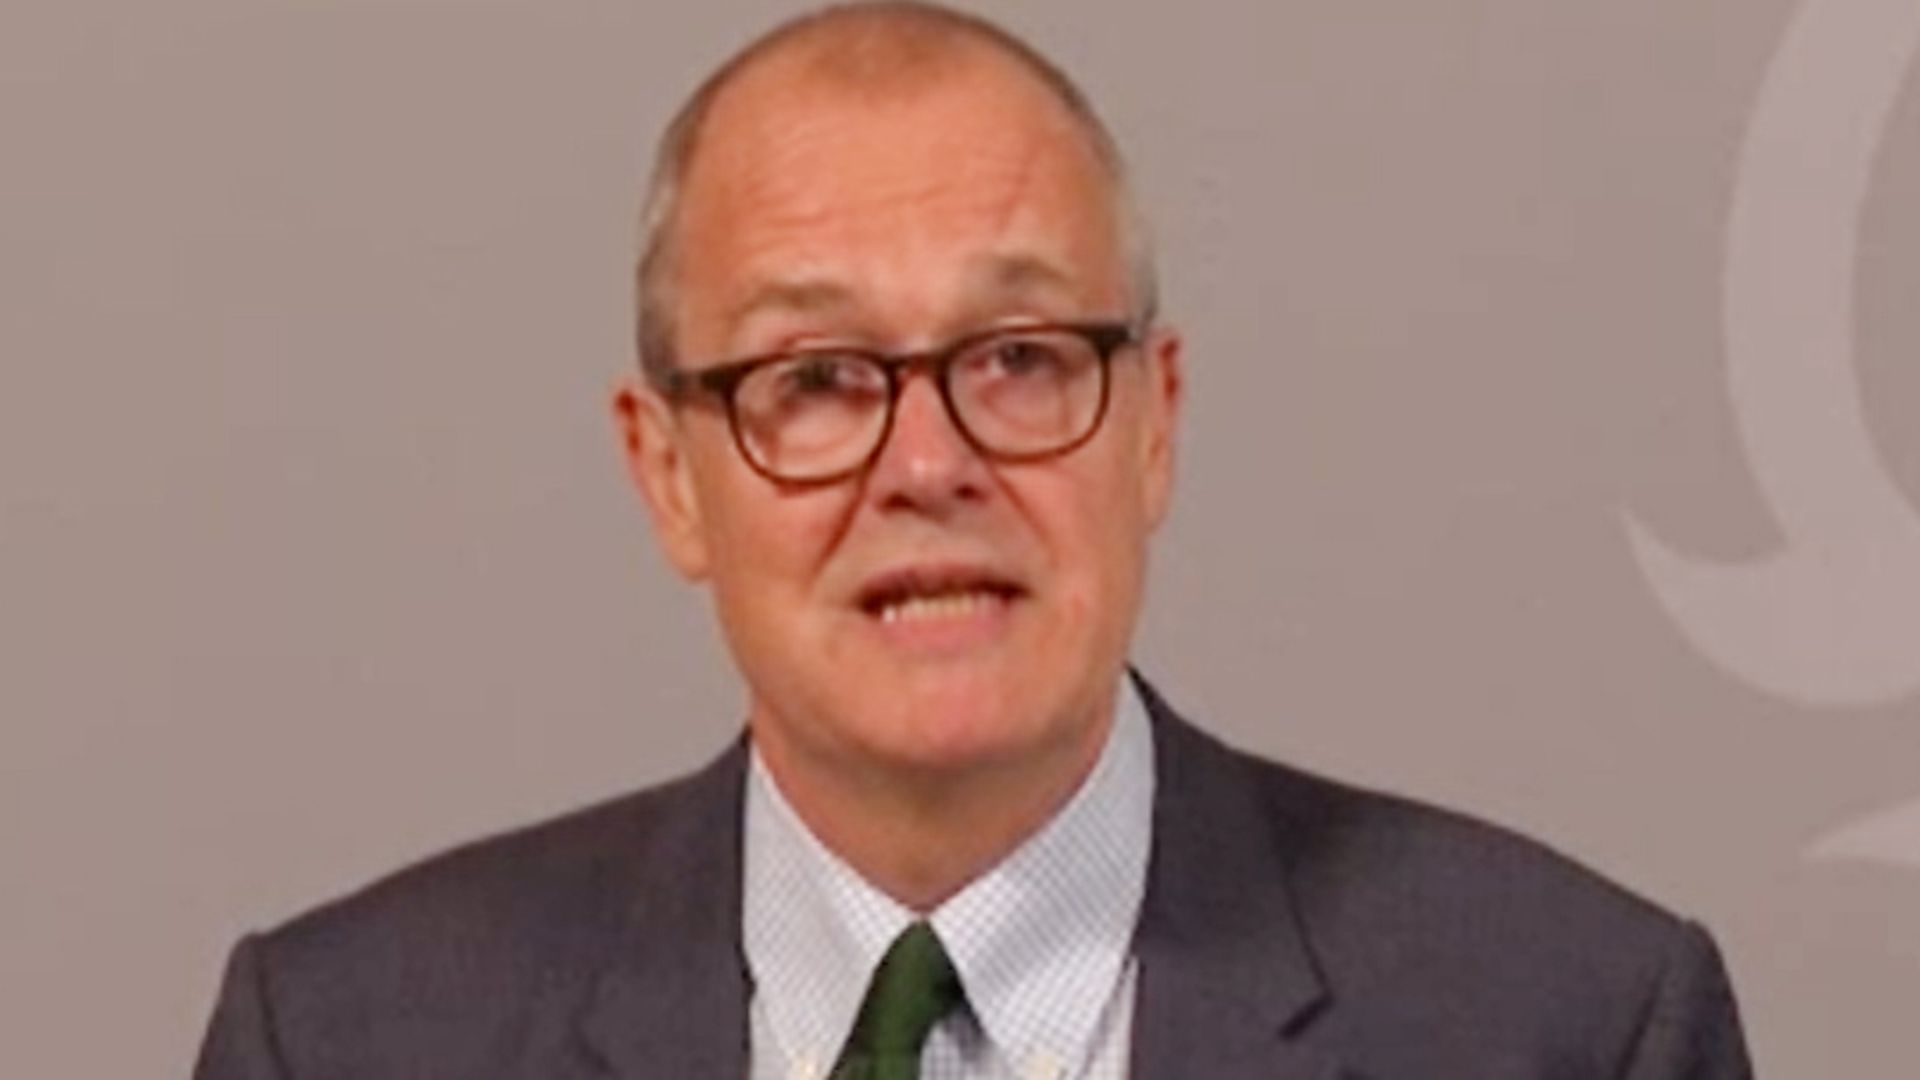 Screen grab of the government's chief scientific adviser Sir Patrick Vallance speaking at a Downing Street briefing to explain how the coronavirus is spreading in the UK and the potential scenarios that could unfold as winter approaches. - Credit: PA